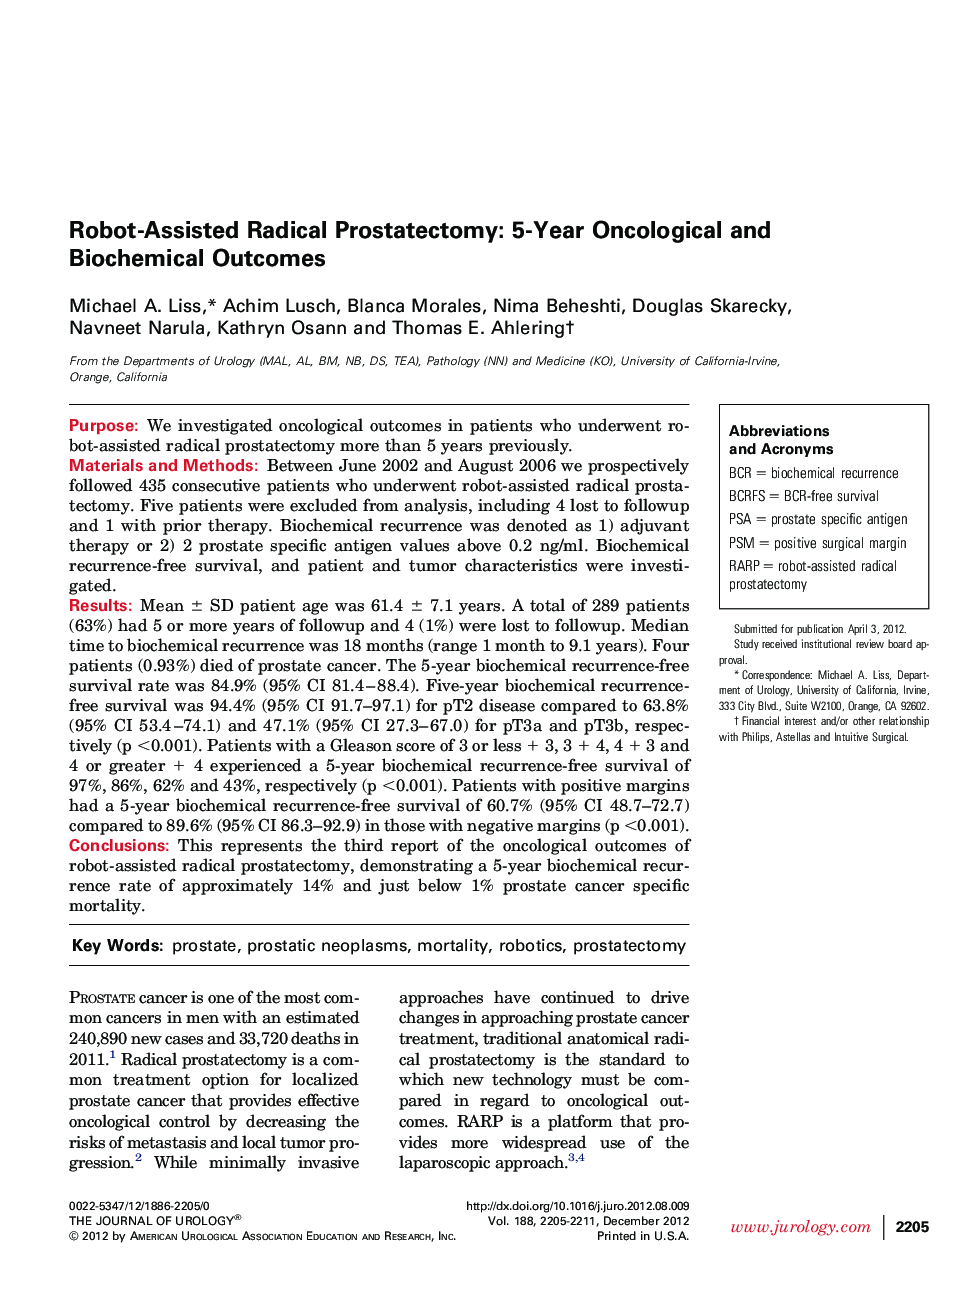 Robot-Assisted Radical Prostatectomy: 5-Year Oncological and Biochemical Outcomes